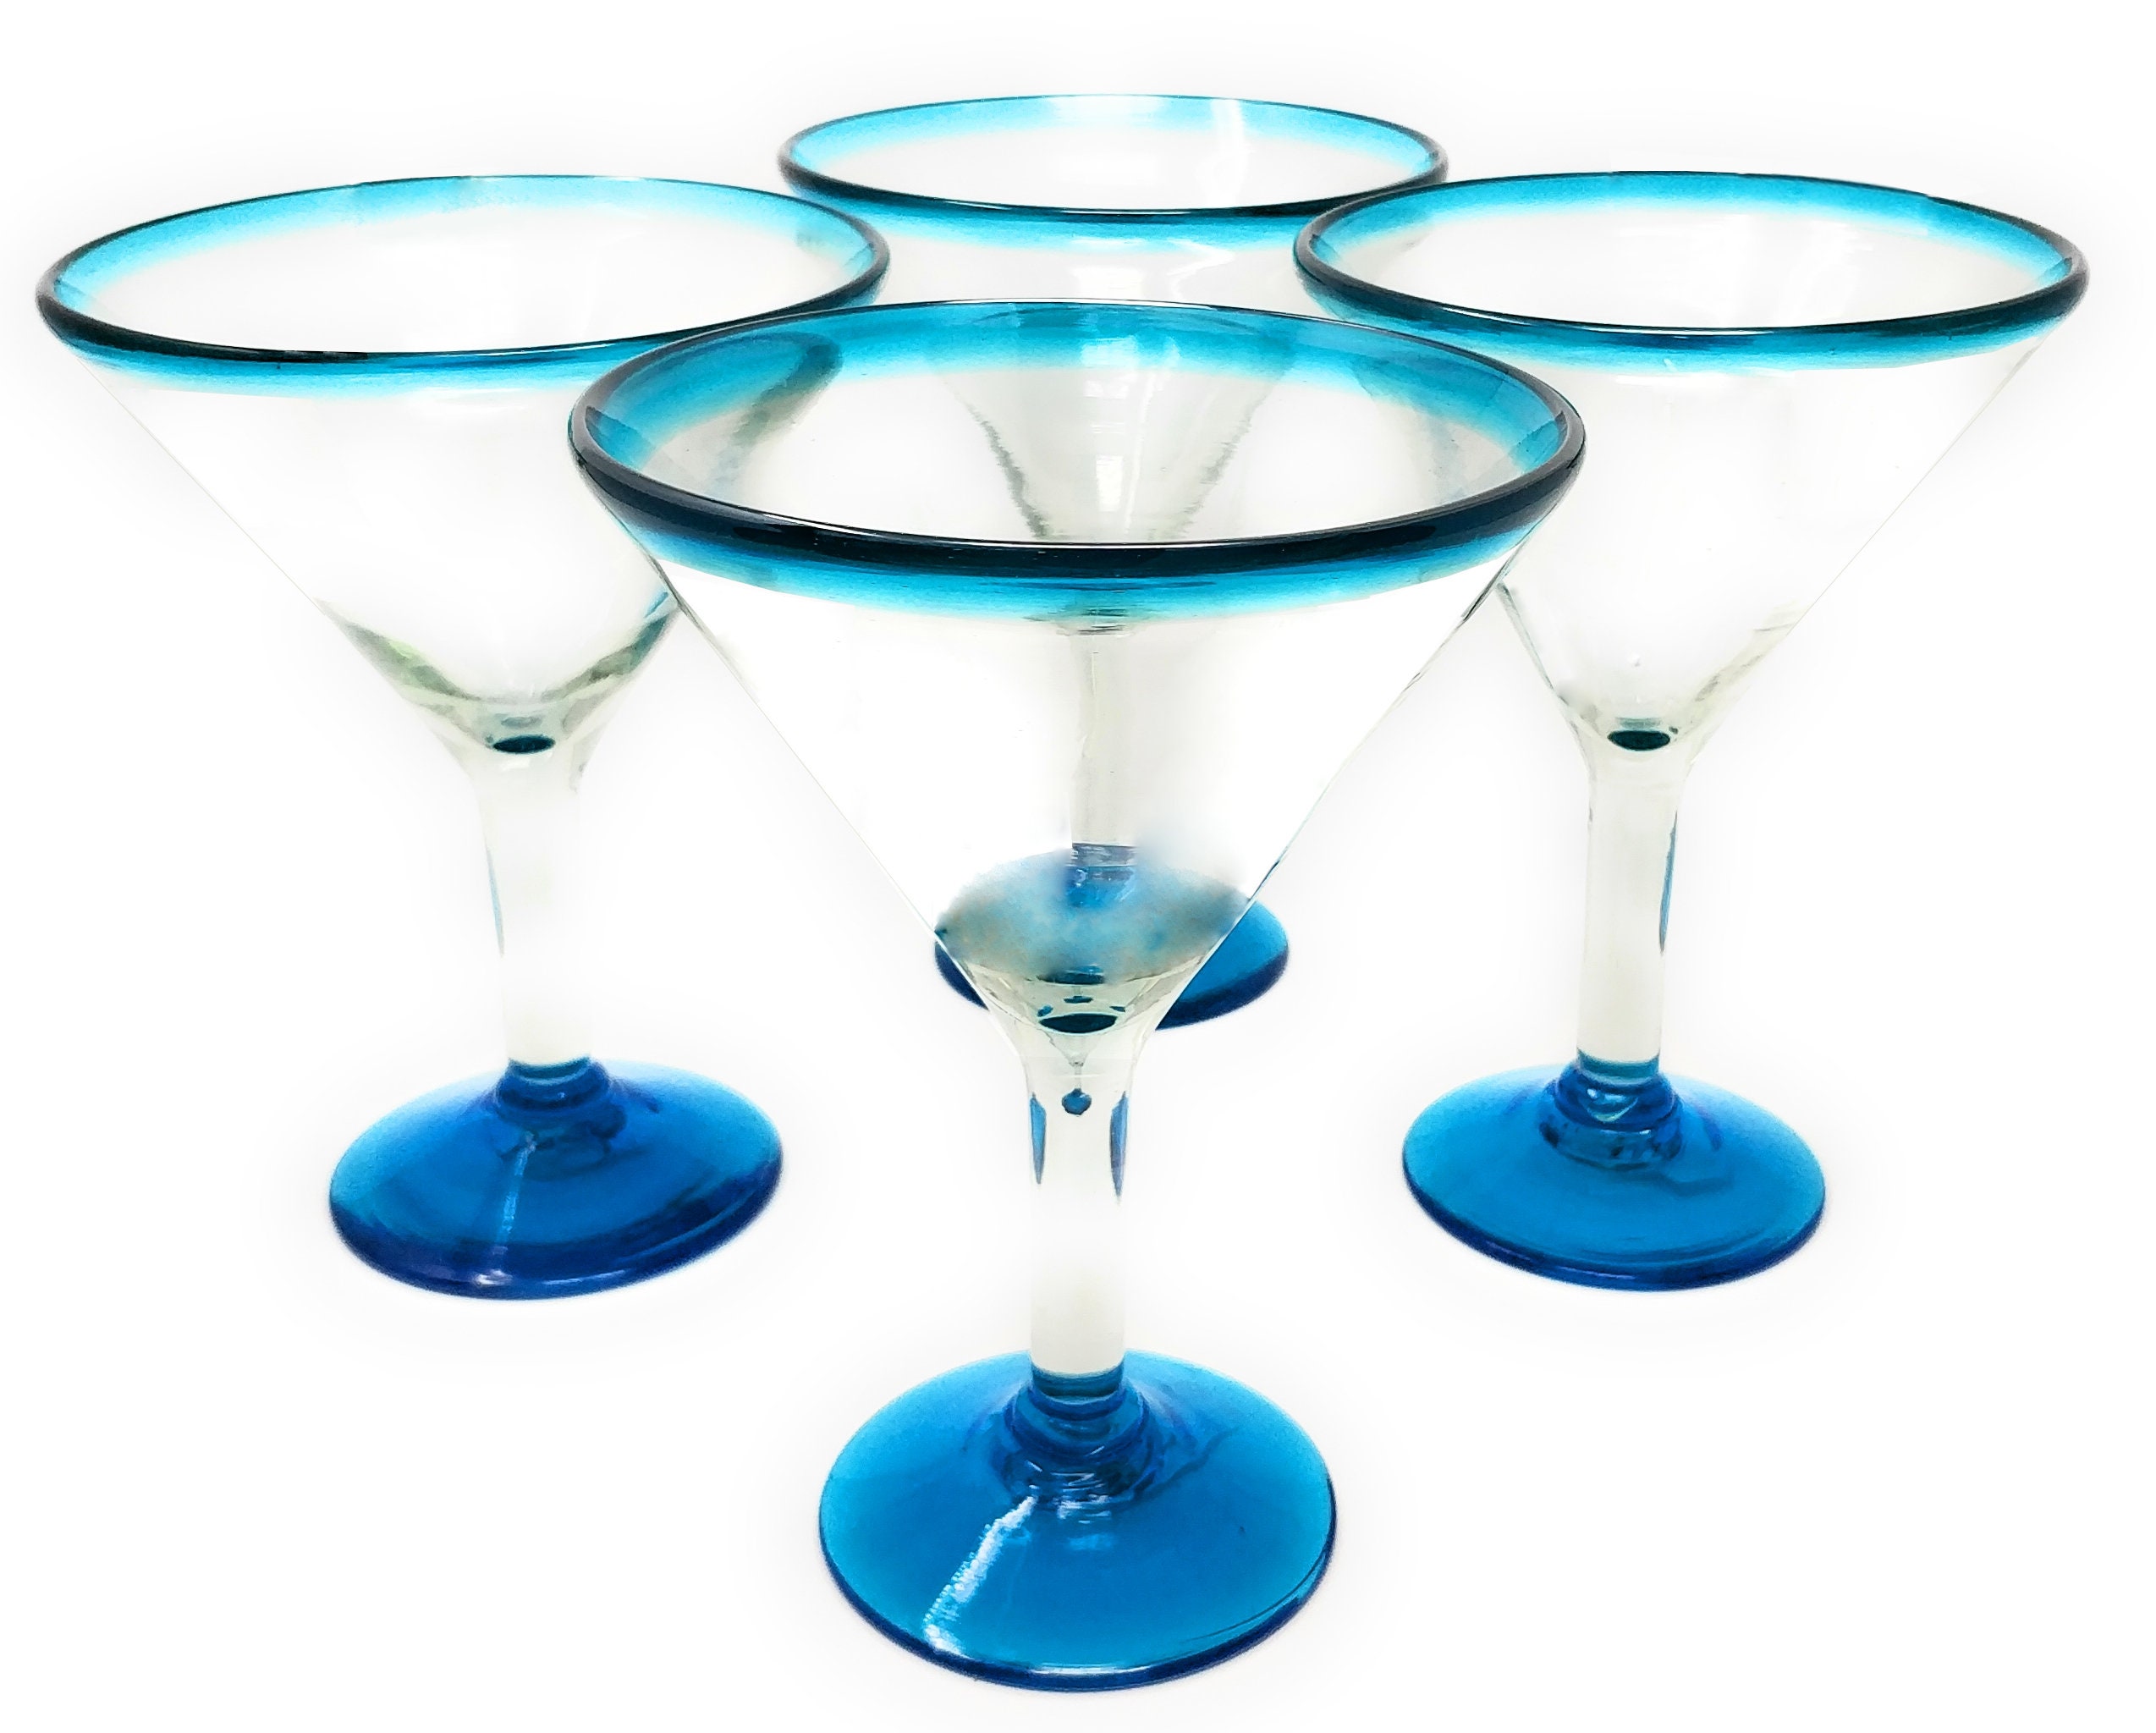 12 oz Margarita Cocktail Glasses + Colorful Party Rims, Set of 4, Heavy